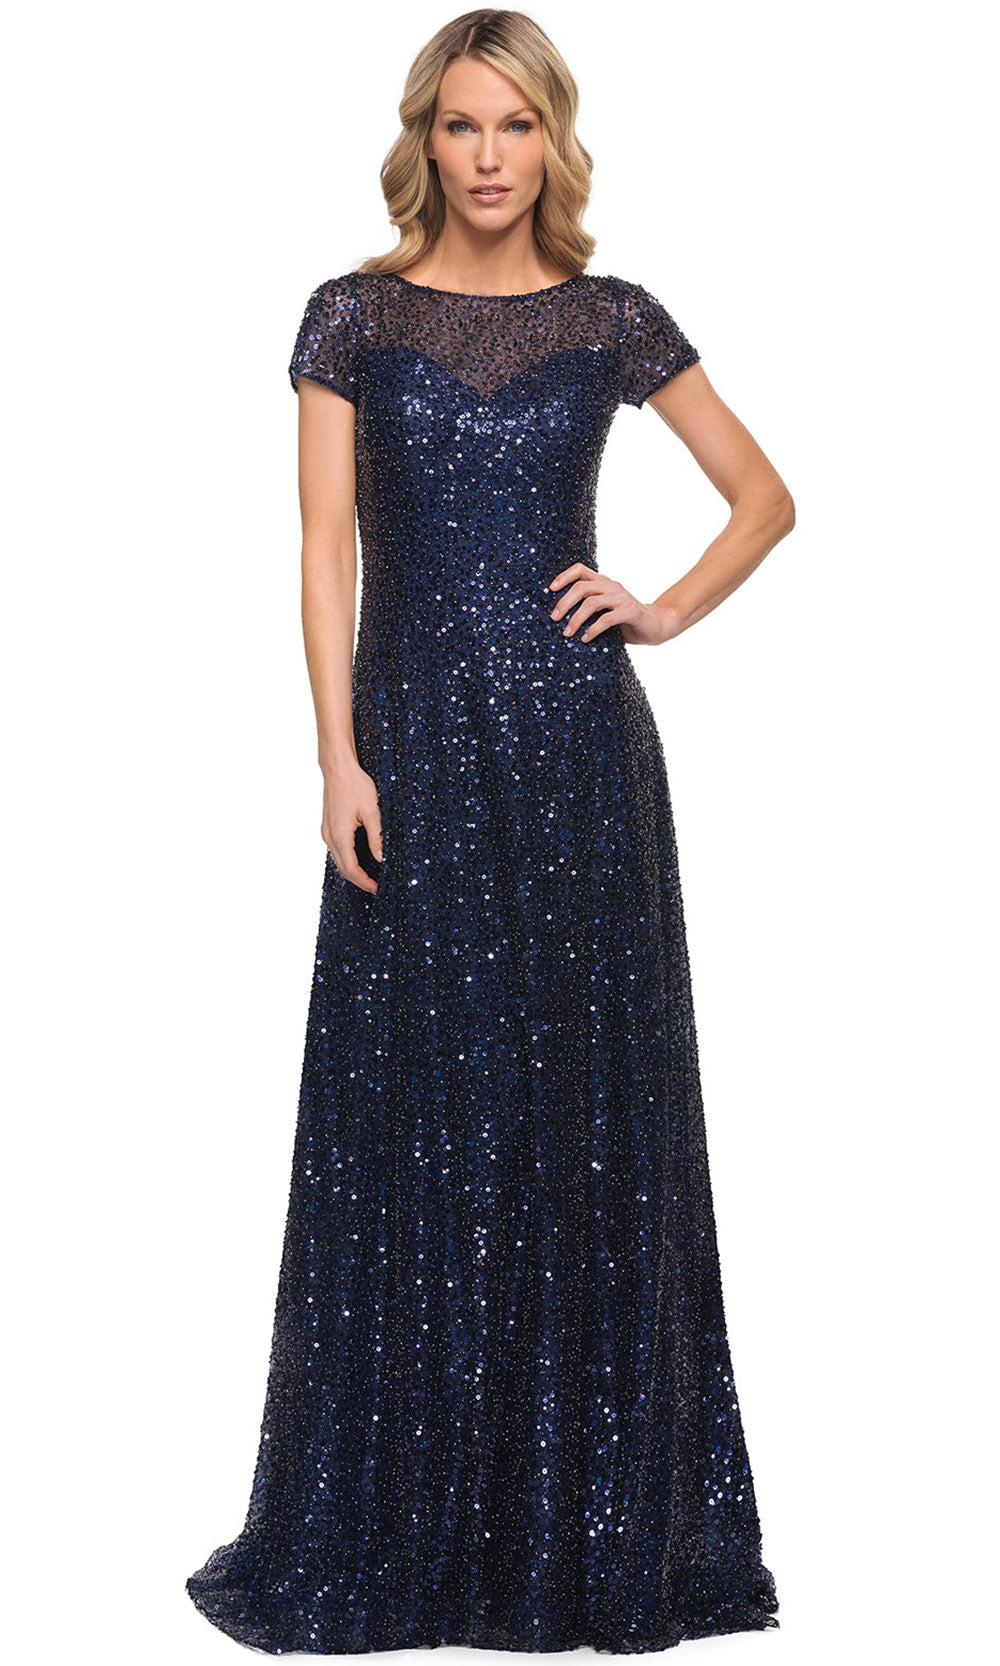 La Femme - 30122 Sparkling Beaded Gown With Sheer Neckline In Blue